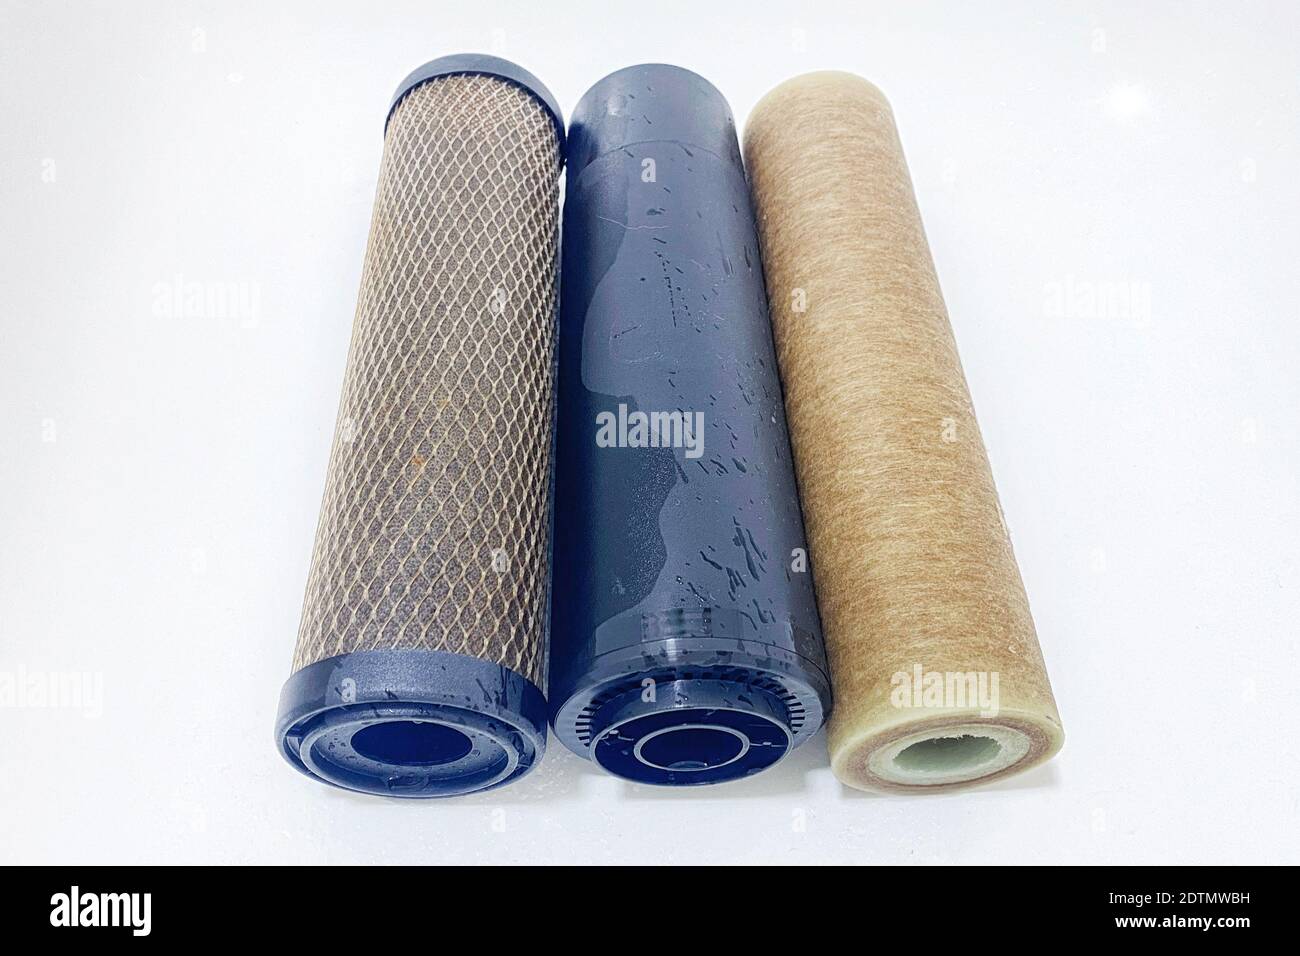 Used water filter cartridges, closeup. Elements of a filtration system for clean and healthy water. Stock Photo